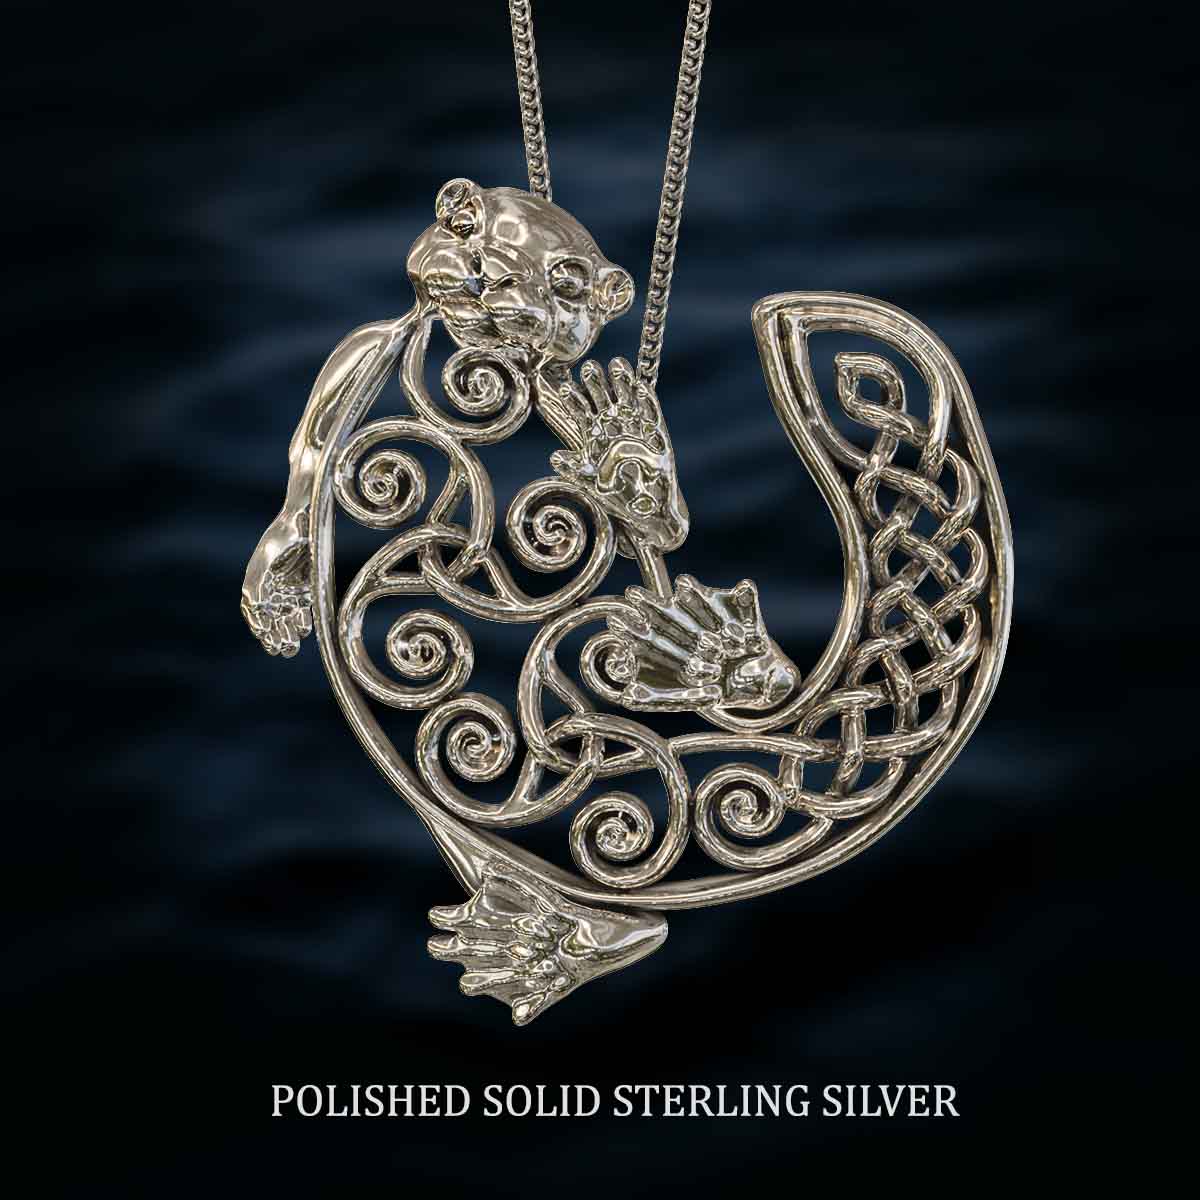     Polished-Solid-Sterling-Silver-Celtic-Otter-Pendant-Jewelry-For-Necklace